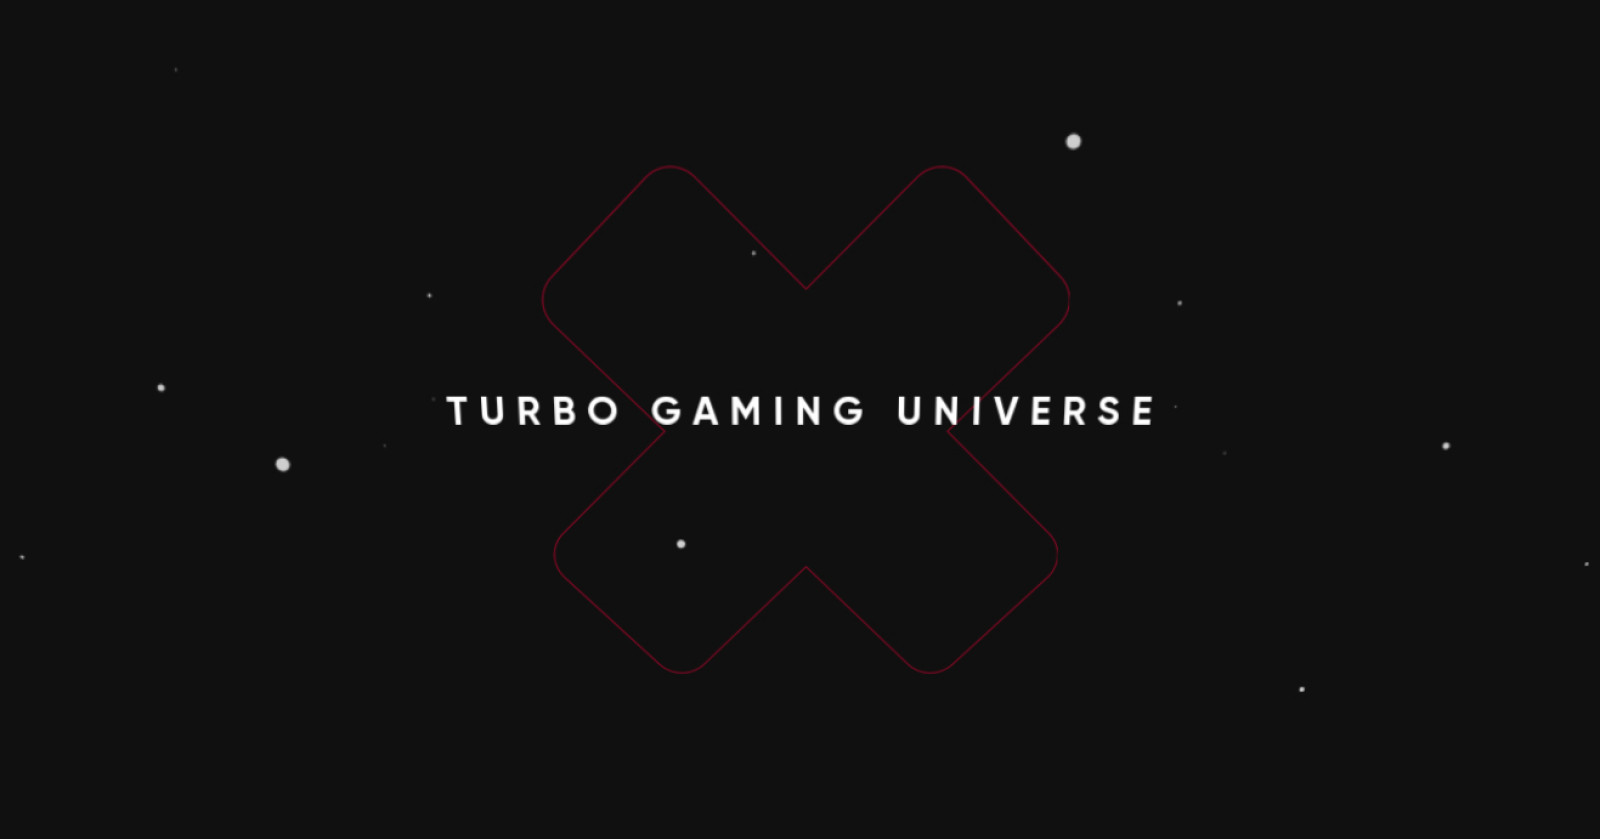 Gamingtec join forces with Turbo Games to turbo-charge gaming experience